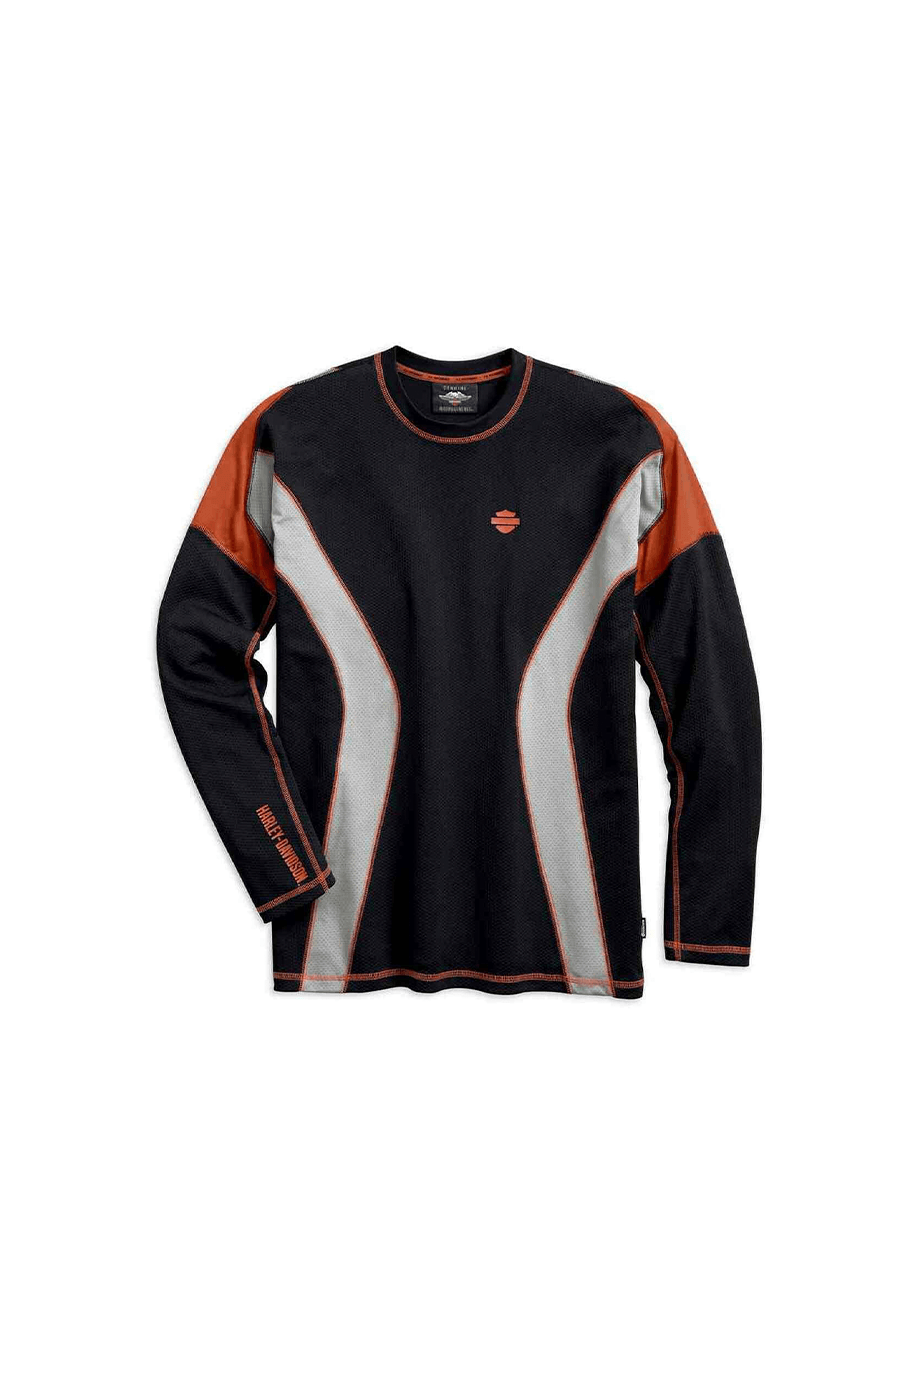 Harley-Davidson® Men's Performance Long Sleeve Tee With Coolcoretechnology